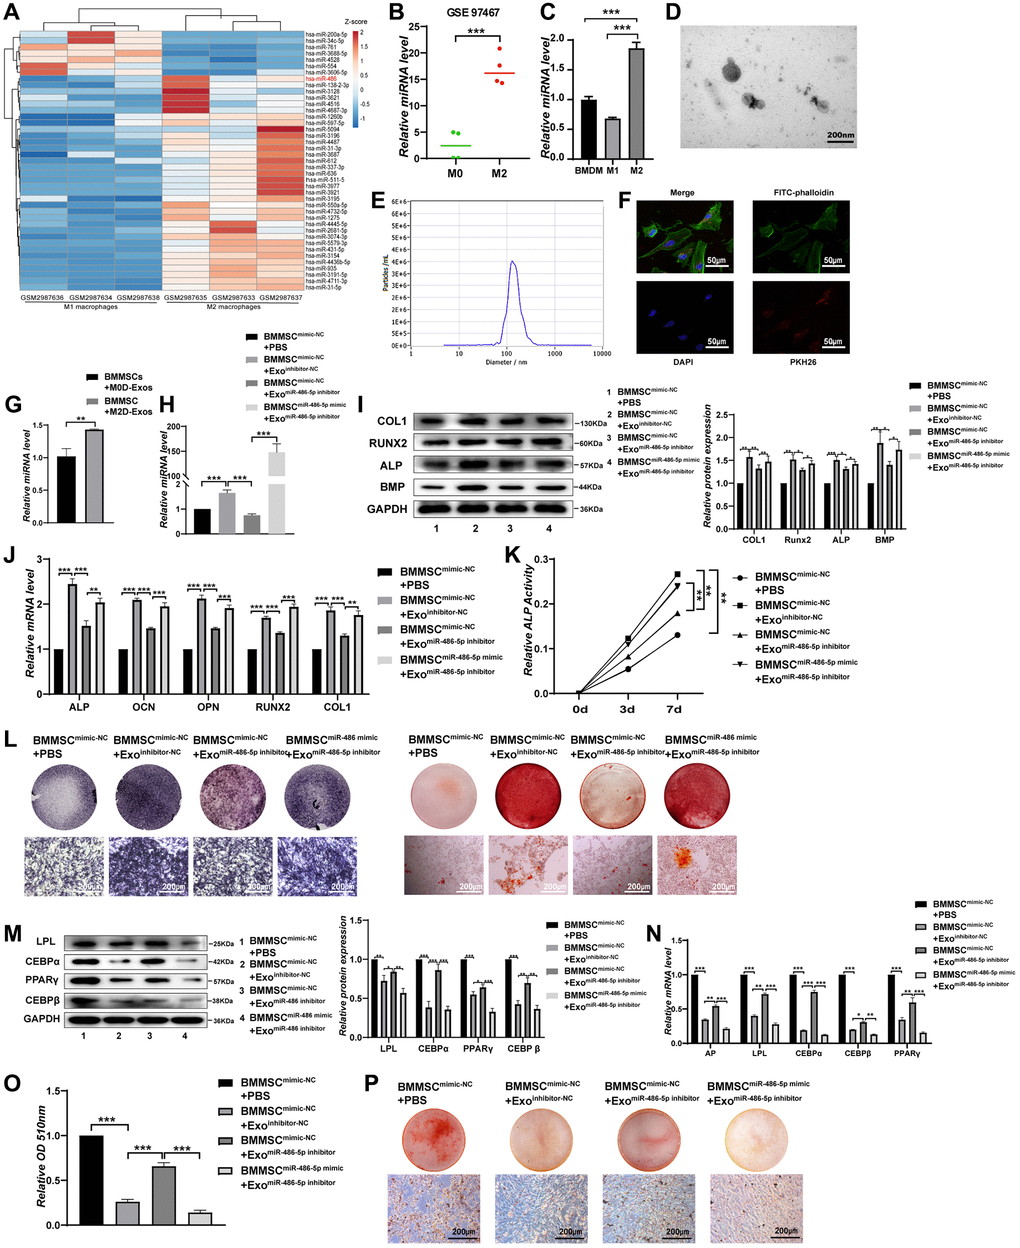 M2 macrophage-derived exosomal miRNA-486-5p promotes the osteogenic differentiation and inhibits the adipogenic differentiation of BMMSCs. (A) A heatmap identified the differently expressed miRNAs between M2 macrophages and M1 macrophages using GSE 110339 from the Gene Expression Omnibus (GEO) dataset (fold change > 1 or B) Expression of the differentially expressed miR-486-5p between M2 macrophages-derived exosomes (M2D-Exos) and monocyte-derived exosomes using GSE97467 from the GEO dataset. (C) The miR-486-5p levels in bone marrow-derived macrophages (BMDMs), M1 macrophages, and M2 macrophages were measured by qRT-PCR analysis. (D) The morphology of M2D-Exos was shown by transmission electron microscopy (TEM). Scale bars, 200 nm. (E) The particle size distribution in purified M2D-Exos determined by nanoparticle tracking analysis (NTA). (F) Laser scanning confocal microscopy analysis of the internalization of PKH26-labelled M2D-Exos by BMMSCs, Scale bars, 50 μm. (G) Overexpression of miR-486-5p was detected in the BMMSCs treated with M2D-Exos by qRT-PCR analysis. (H) qRT-PCR analysis was used following the addition of PBS, M2D-Exosinhibitor-NC (exosomes from M2 macrophages transfected with the NC inhibitor) or M2D-ExosmiR-486-5p inhibitor (exosomes from M2 macrophages transfected with the miR-486-5p inhibitor) to assess miR-486-5p expression in the mimic NC- or miR-486-5p-transfected BMMSCs. (I, J) The expression of osteogenic differentiation proteins and mRNAs were assessed by Western blot and qRT-PCR. (K) An ALP activity assay was performed to analyse ALP activity on days 0, 3, and 7. (L) Alizarin red staining of BMMSCs after different transfections for 21 days. Alkaline phosphatase staining of BMMSCs following different treatments for 14 days. Scale bars, 200 μm. (M) Western blot analysis was used to assess the expression of adipogenic differentiation proteins, including LPL, CEBPα, PPARγ, and CEBPβ. (N) qRT-PCR analysis of AP, LPL, CEBPα, CEBPβ, and PPARγ gene levels; (O, P) Oil red O staining and extraction were performed to detect lipid droplet formation on day 10 of adipogenic differentiation. Scale bars, 200 μm. Data are expressed as the mean ± SEM, *p **p ***p 